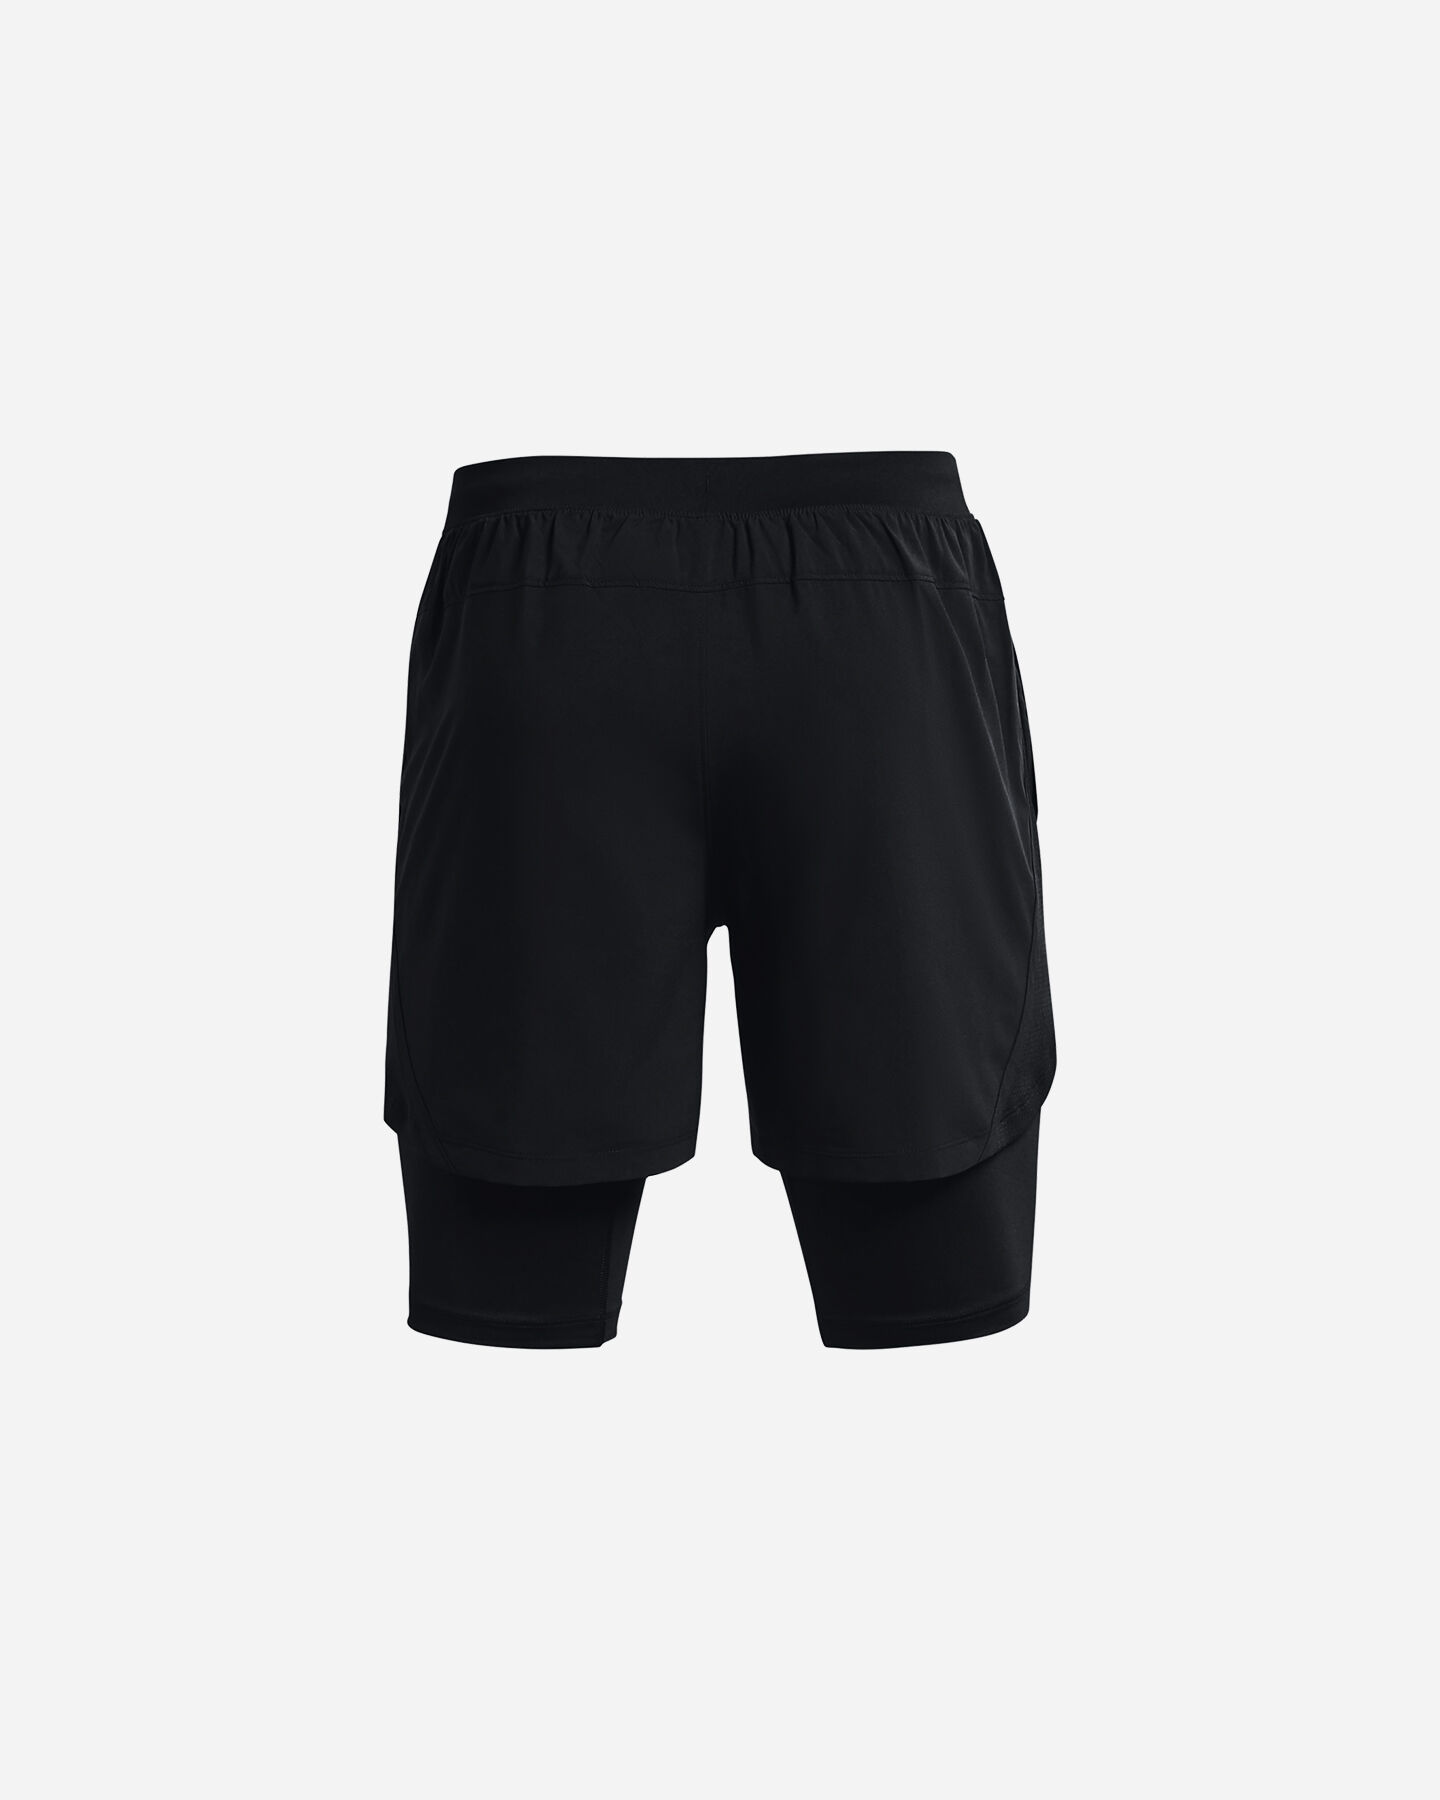  Pantalone training UNDER ARMOUR LAUNCH 5" 2N1 M S5390768|0001|SM scatto 1